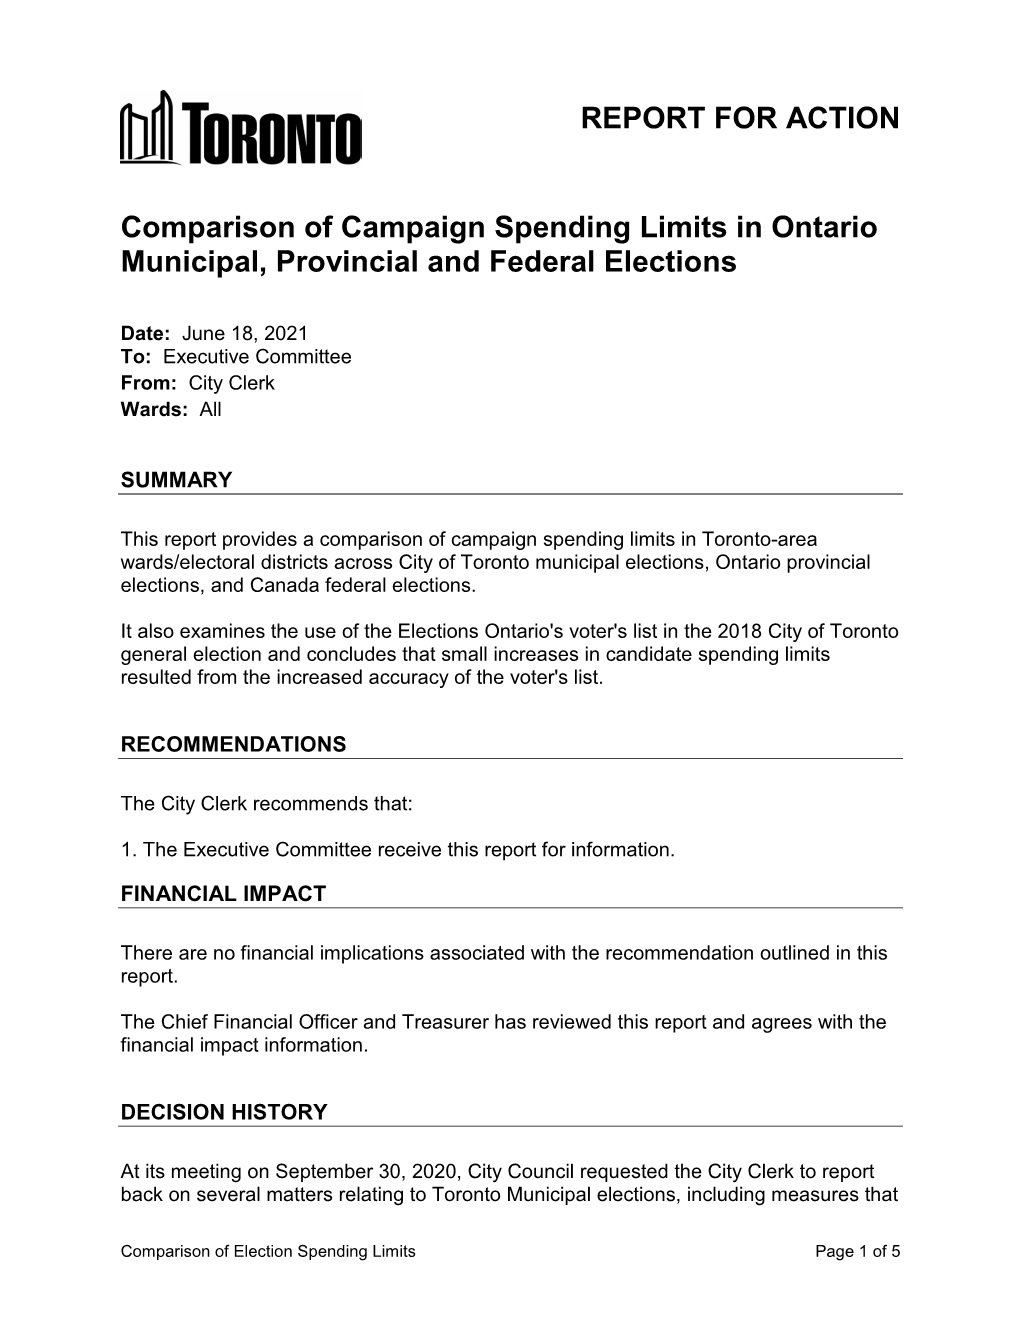 Comparison of Campaign Spending Limits in Ontario Municipal, Provincial and Federal Elections